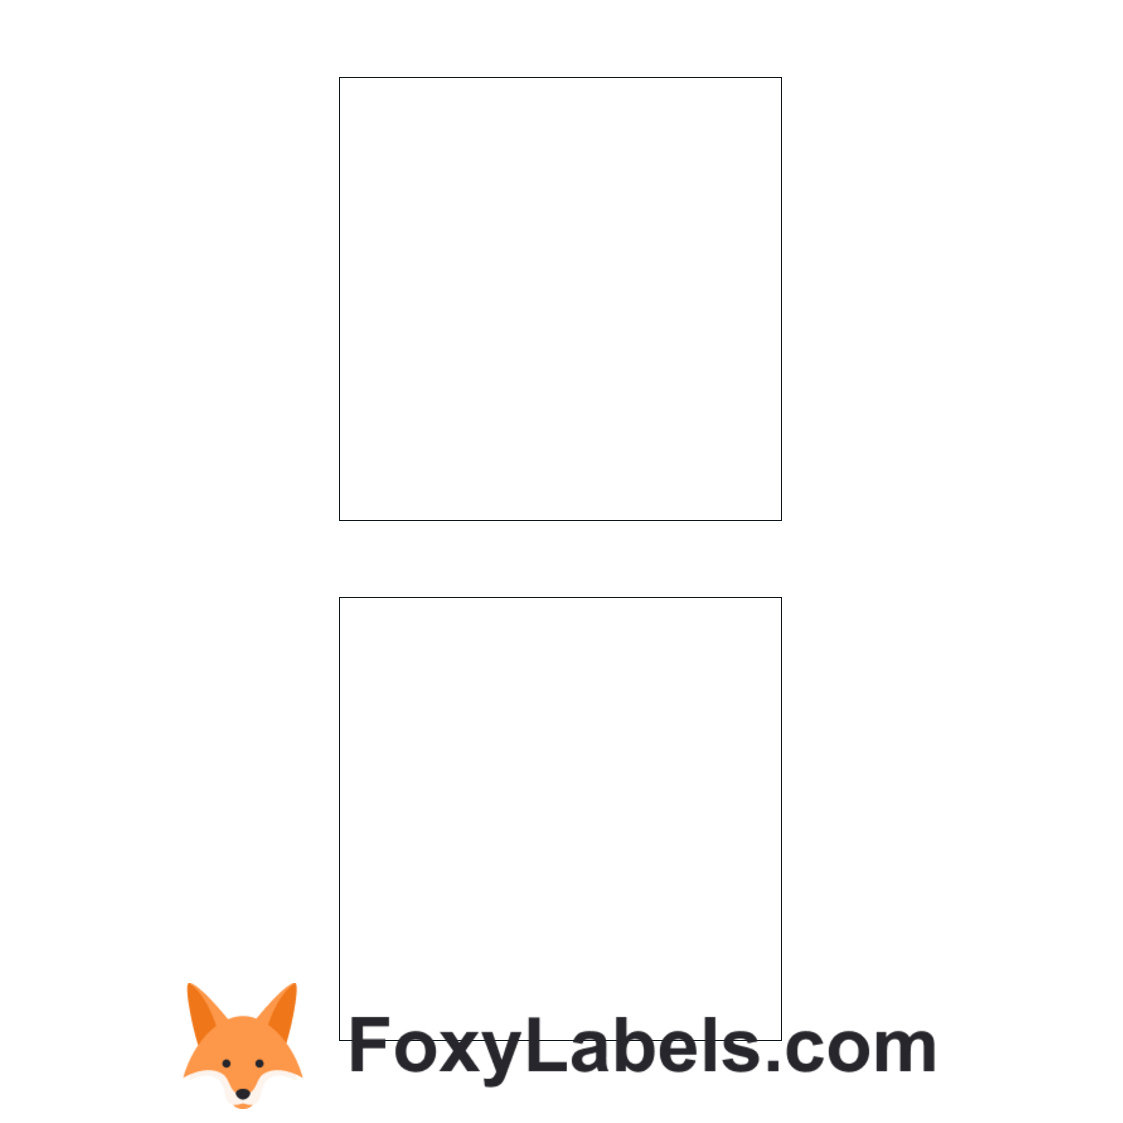 Avery-Zweckform L7760 label template for Google Docs